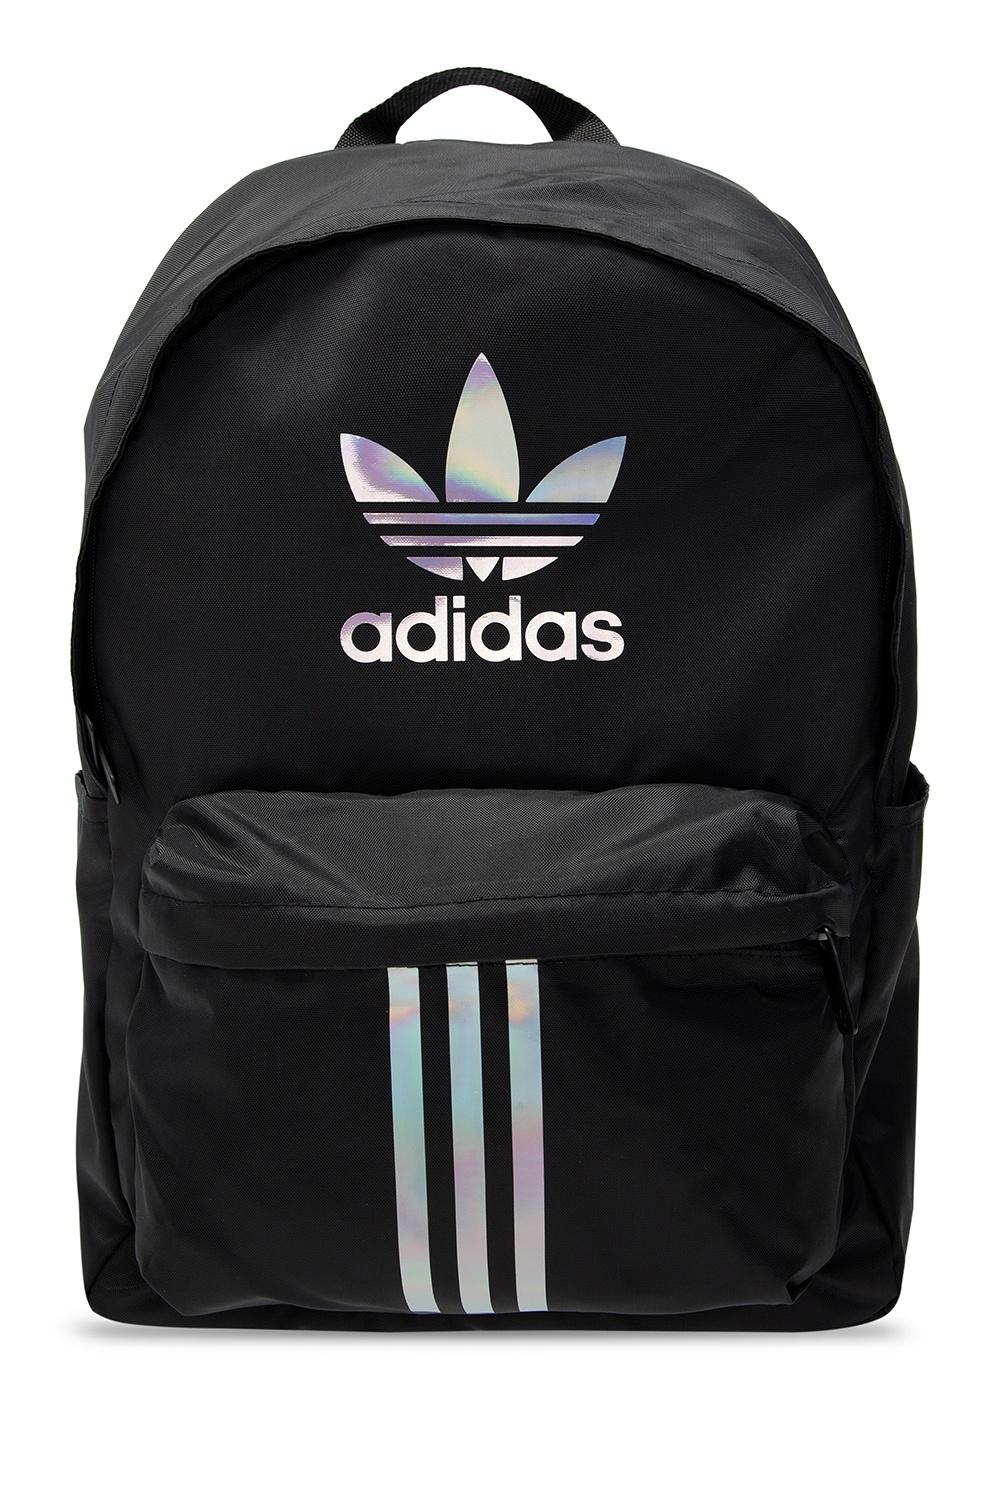 adidas Originals Backpack With Holographic Print Black Lyst